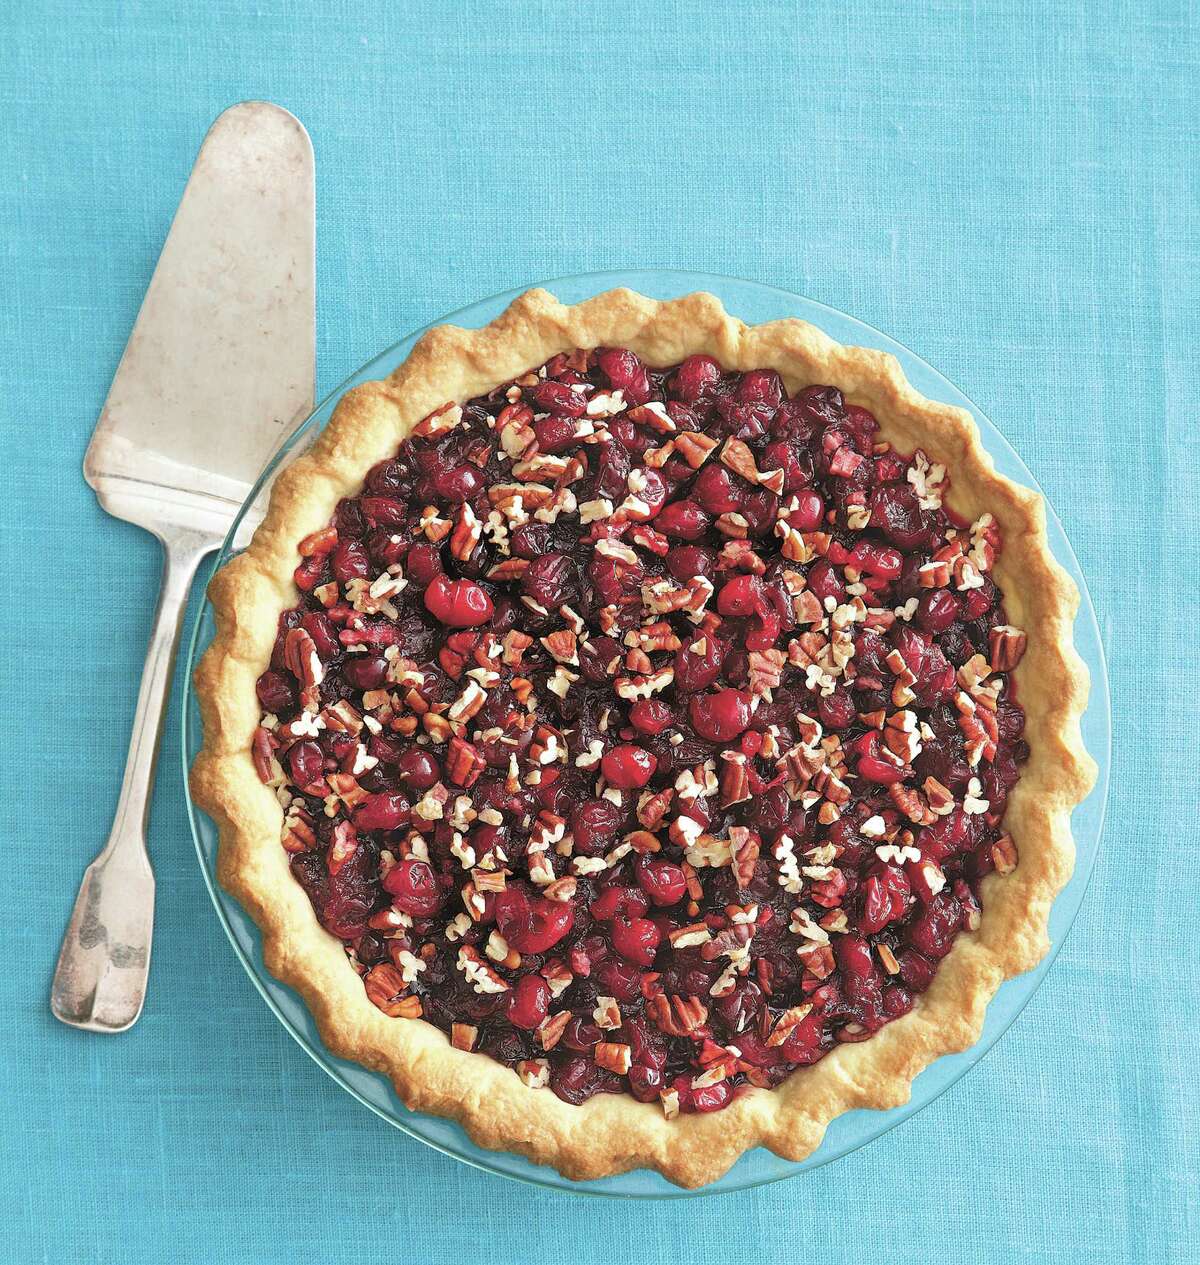 Cranberry Pecan Pie from “Pastry: Foolproof Recipes for the Home Cook” by Nick Malgieri